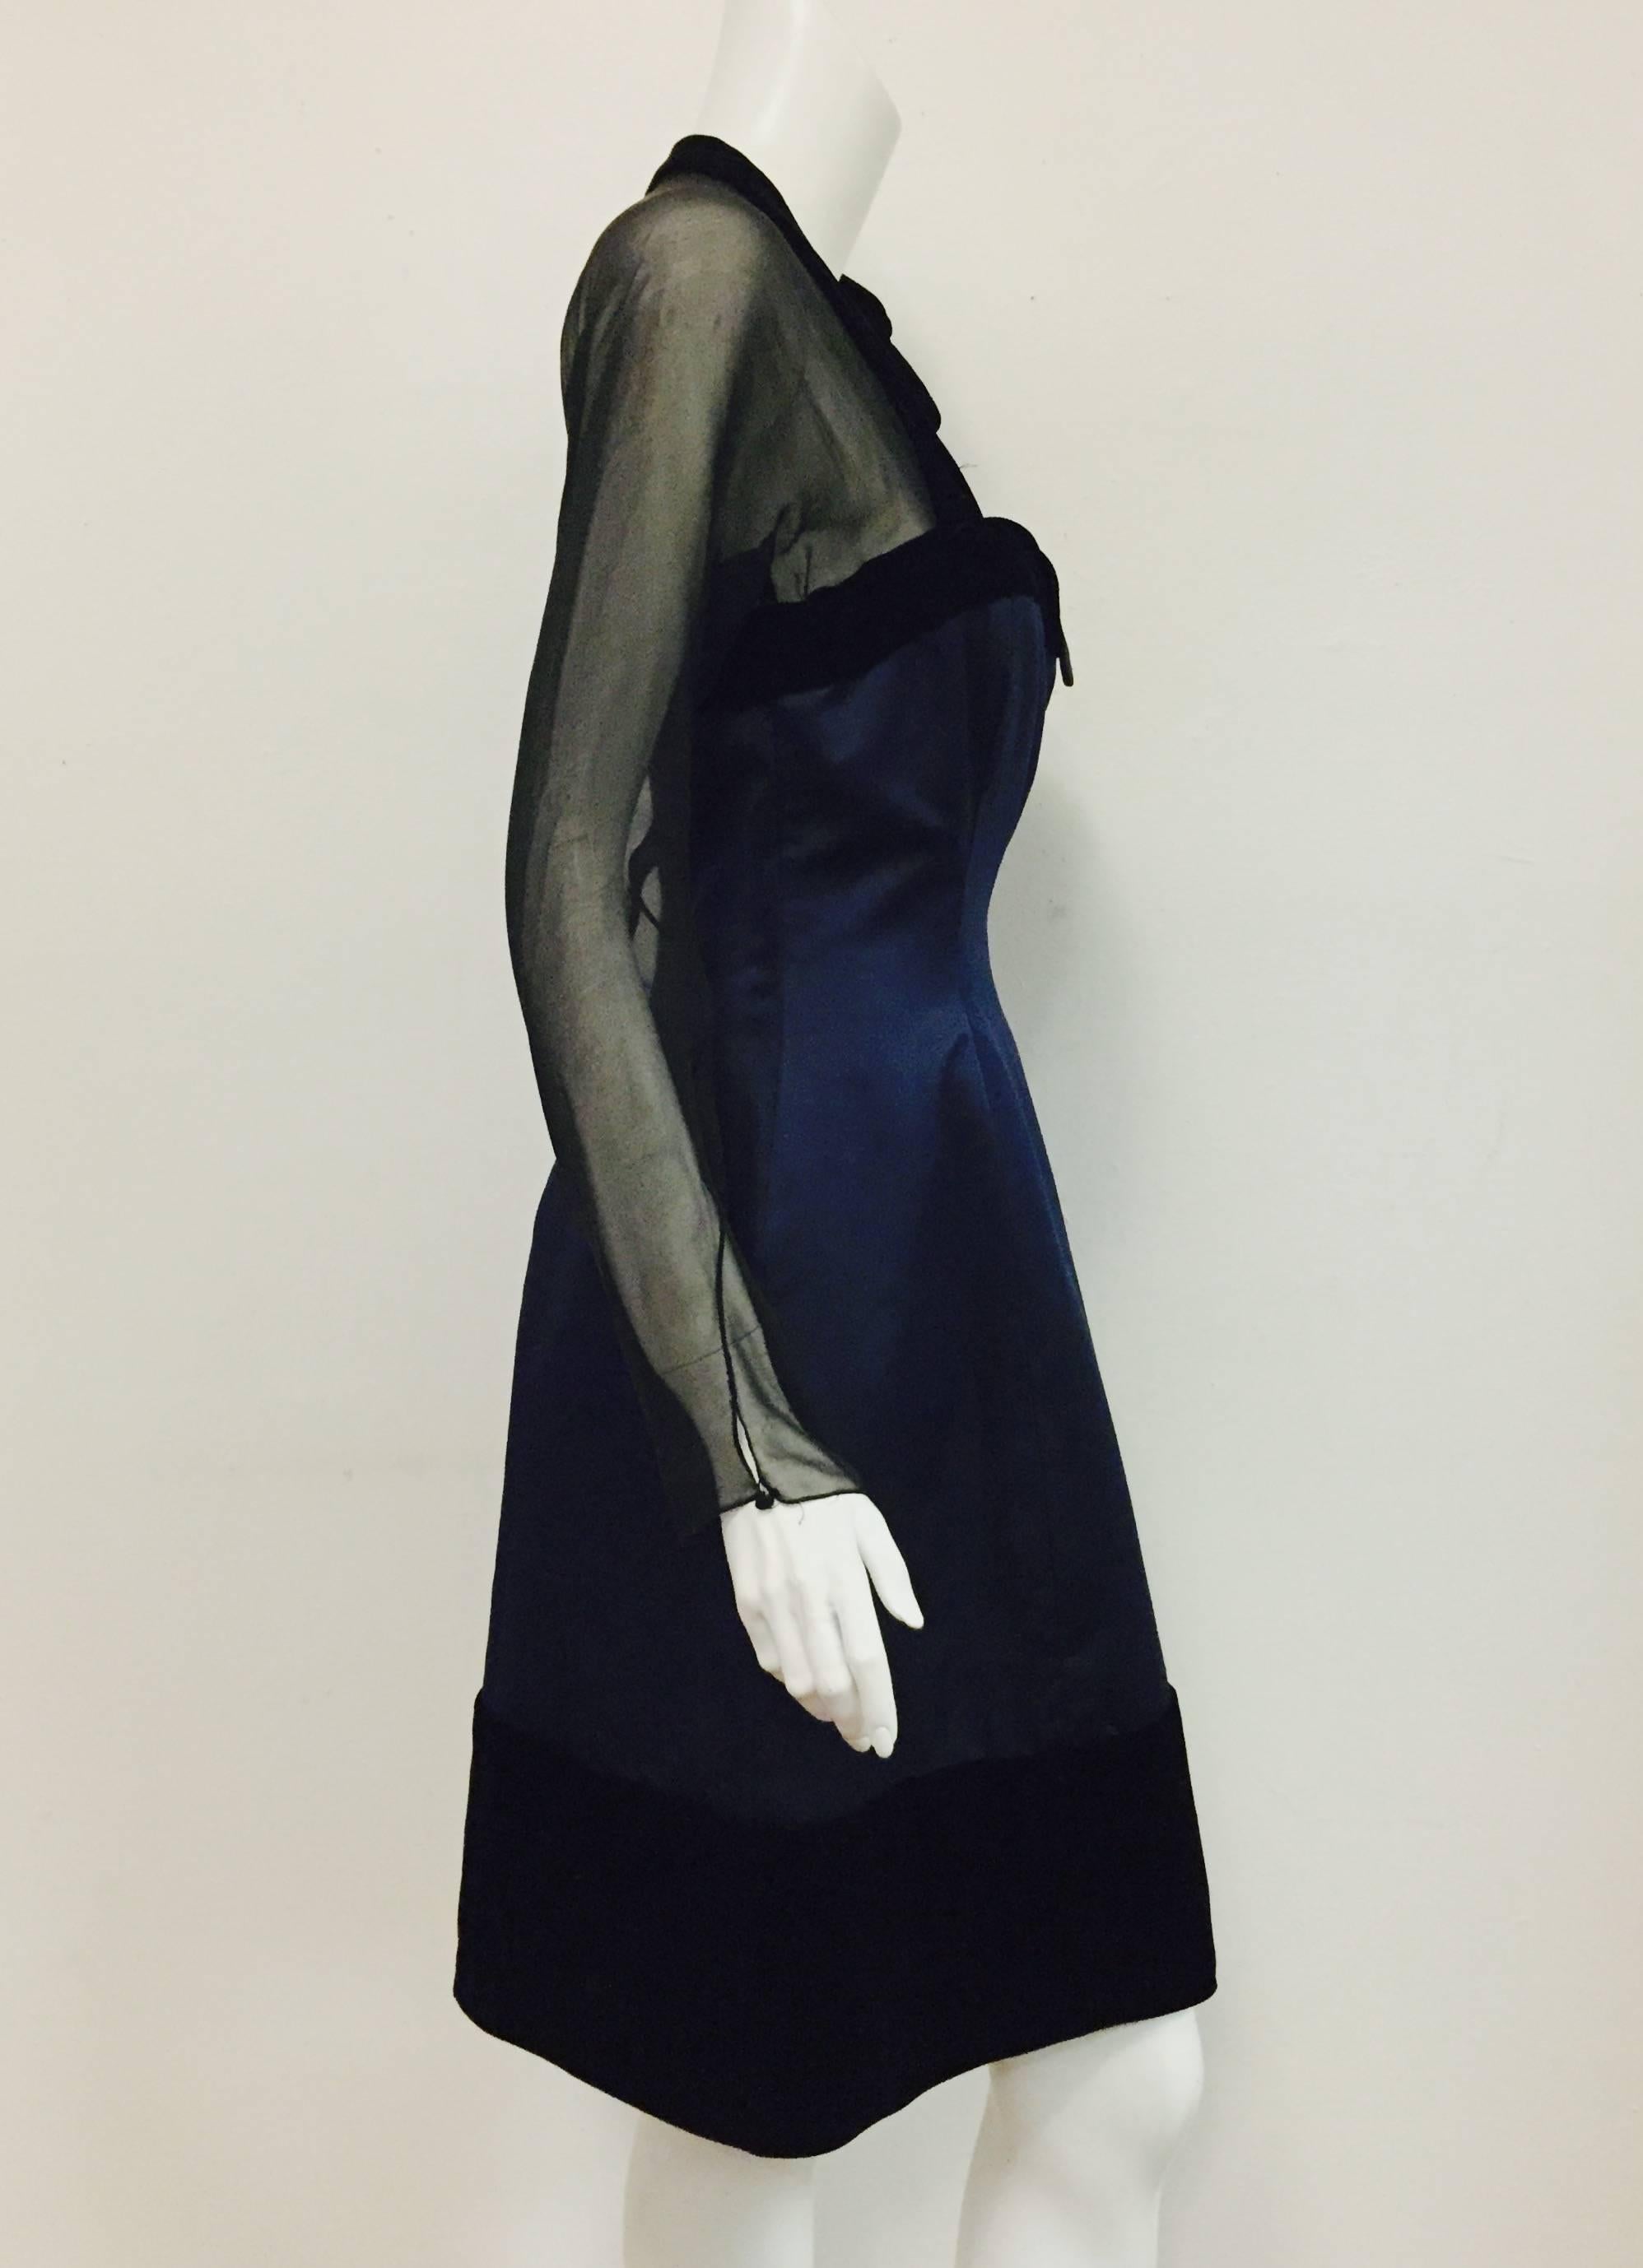 Oscar de la Renta's 1992 duchesse satin cocktail dress with black velvet trim at neckline and hem is elegance defined!  Black velvet bow on one side and sheer black chiffon illusion sleeves and upper back finish this couture dress.  

A boned bodice